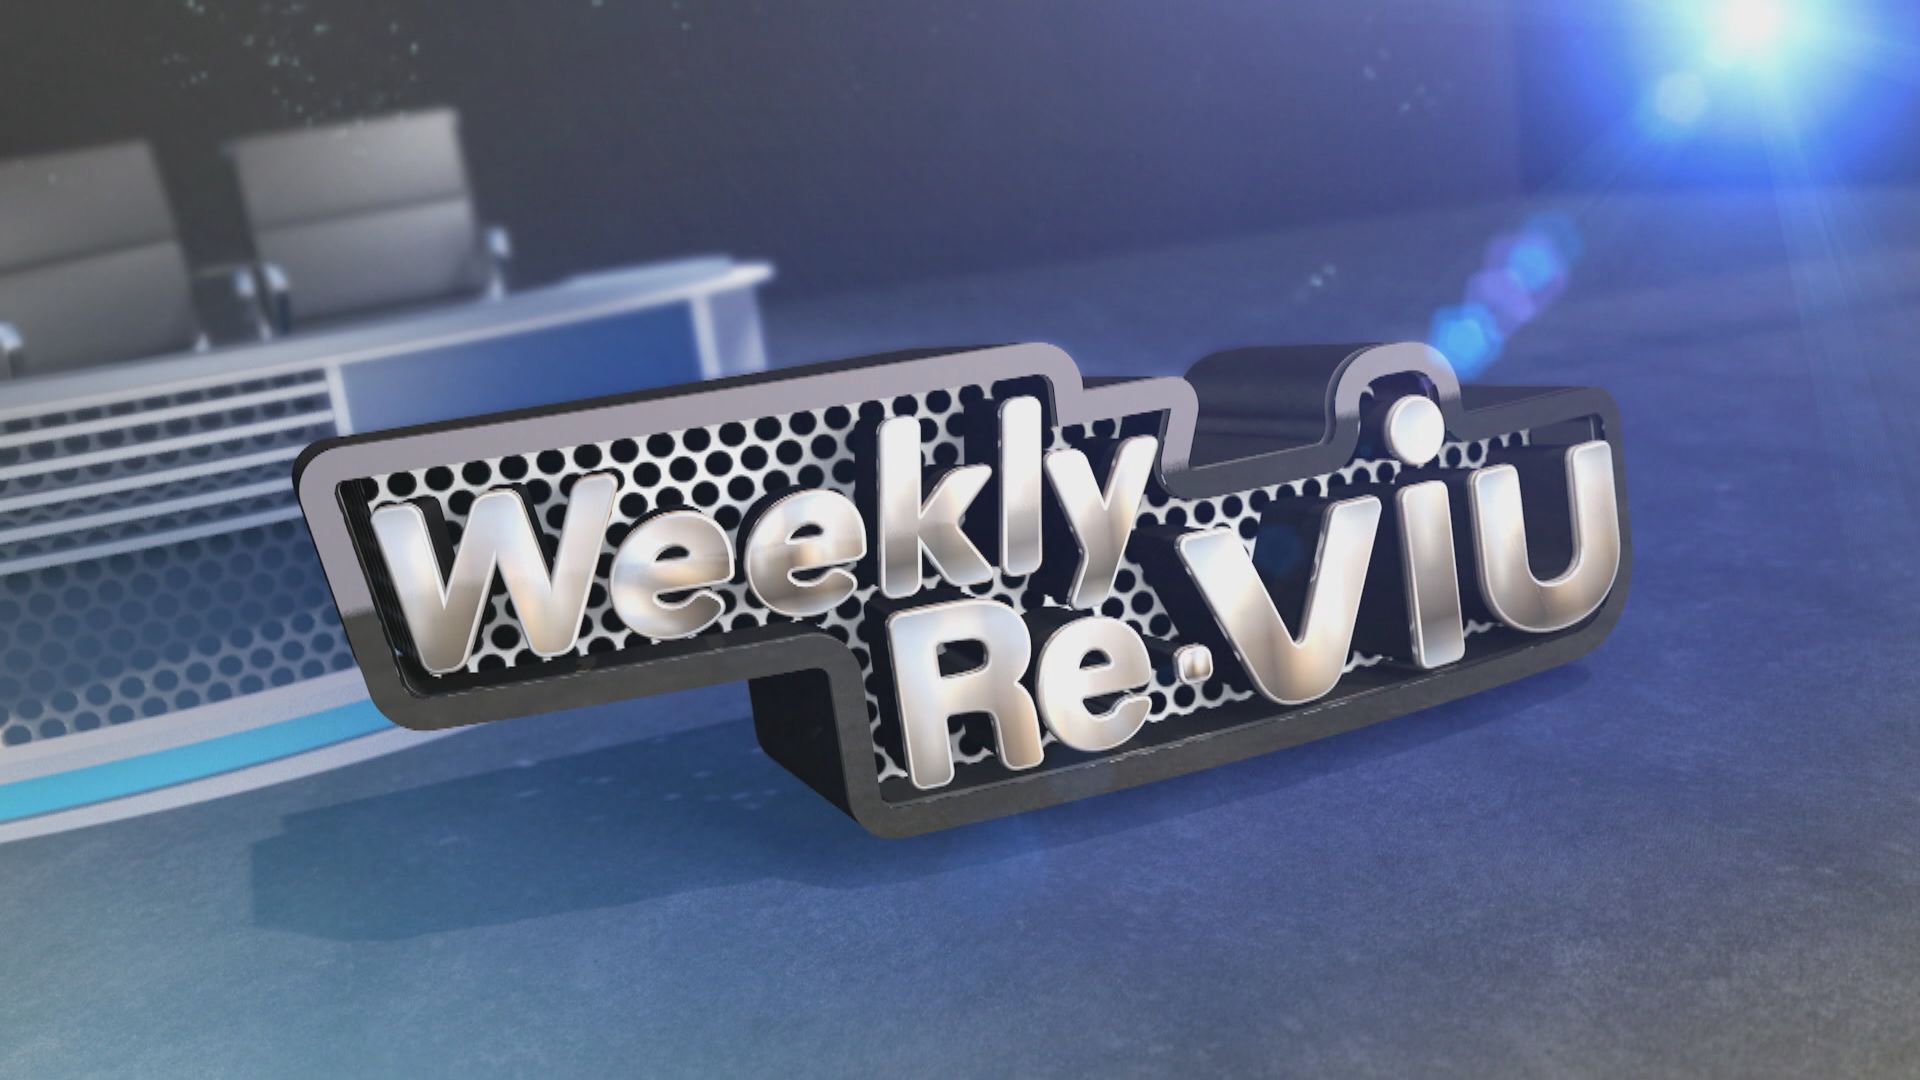 Weekly ReViu | Part Two - Story Roundup (10.9.2022)